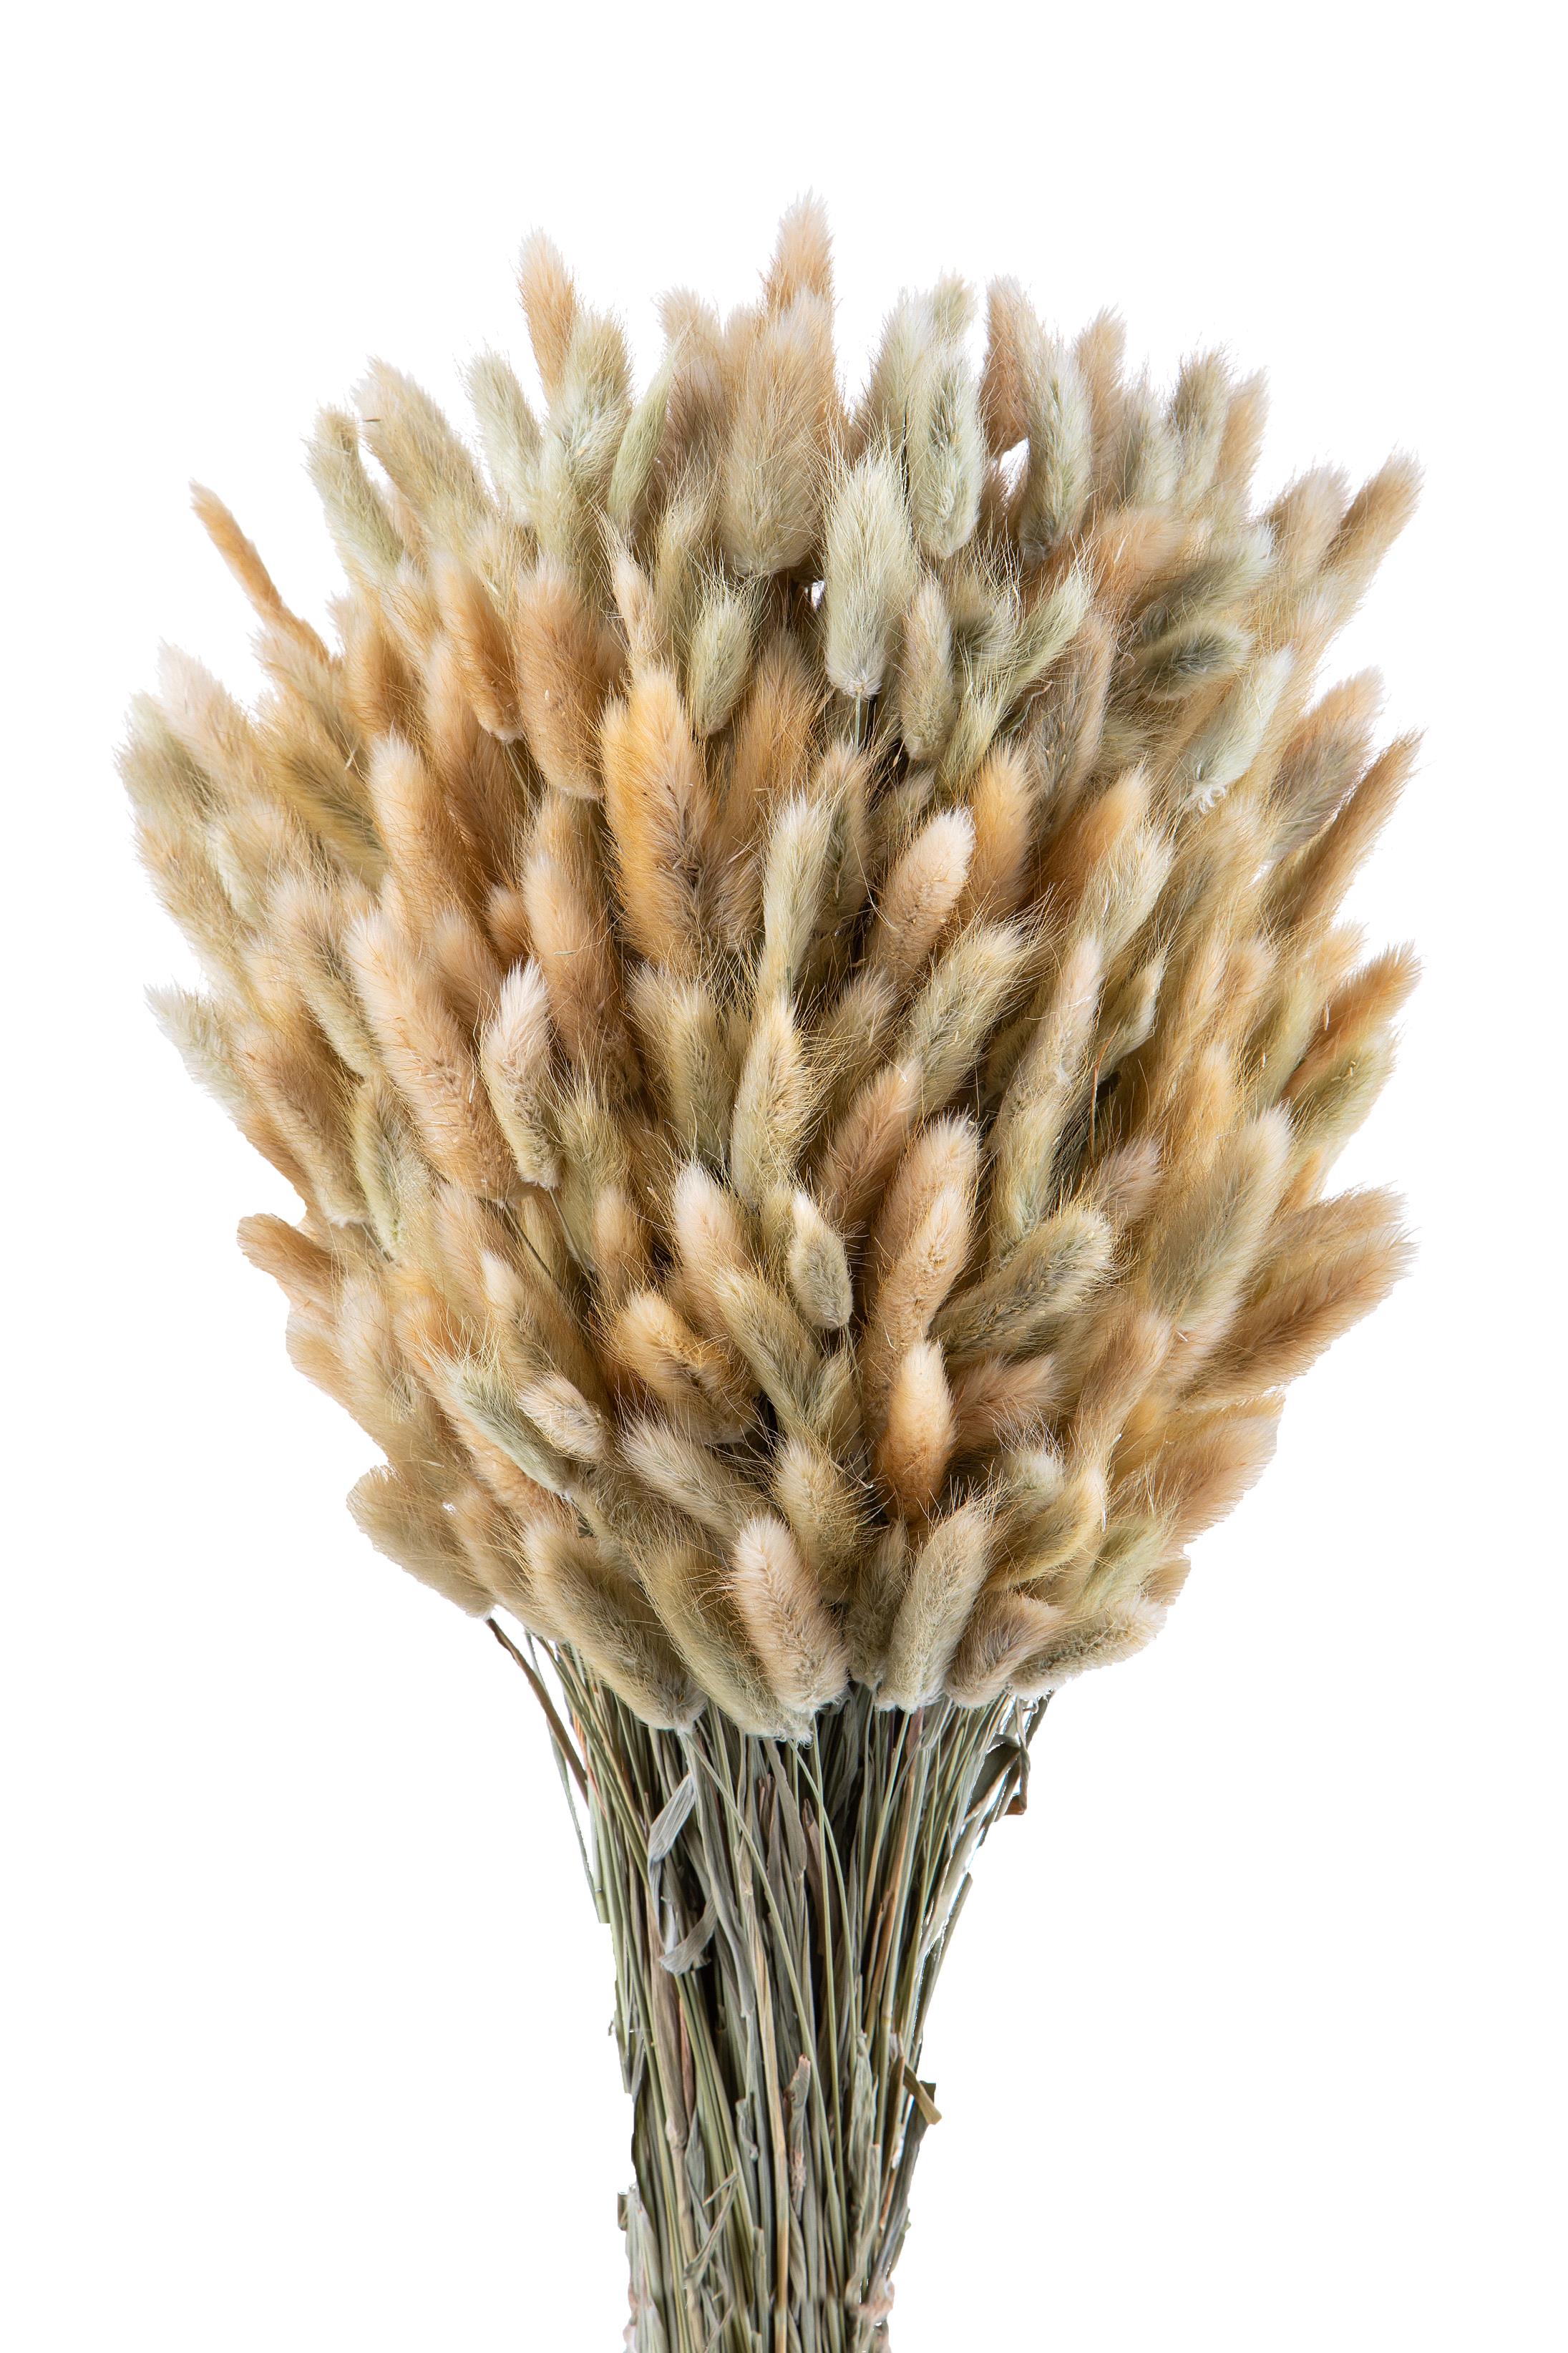 NATURAL PRODUCTS DRIED FLOWERS AND ERBS, NATURAL GRASS, LAGURUS NATURALE MAZZO